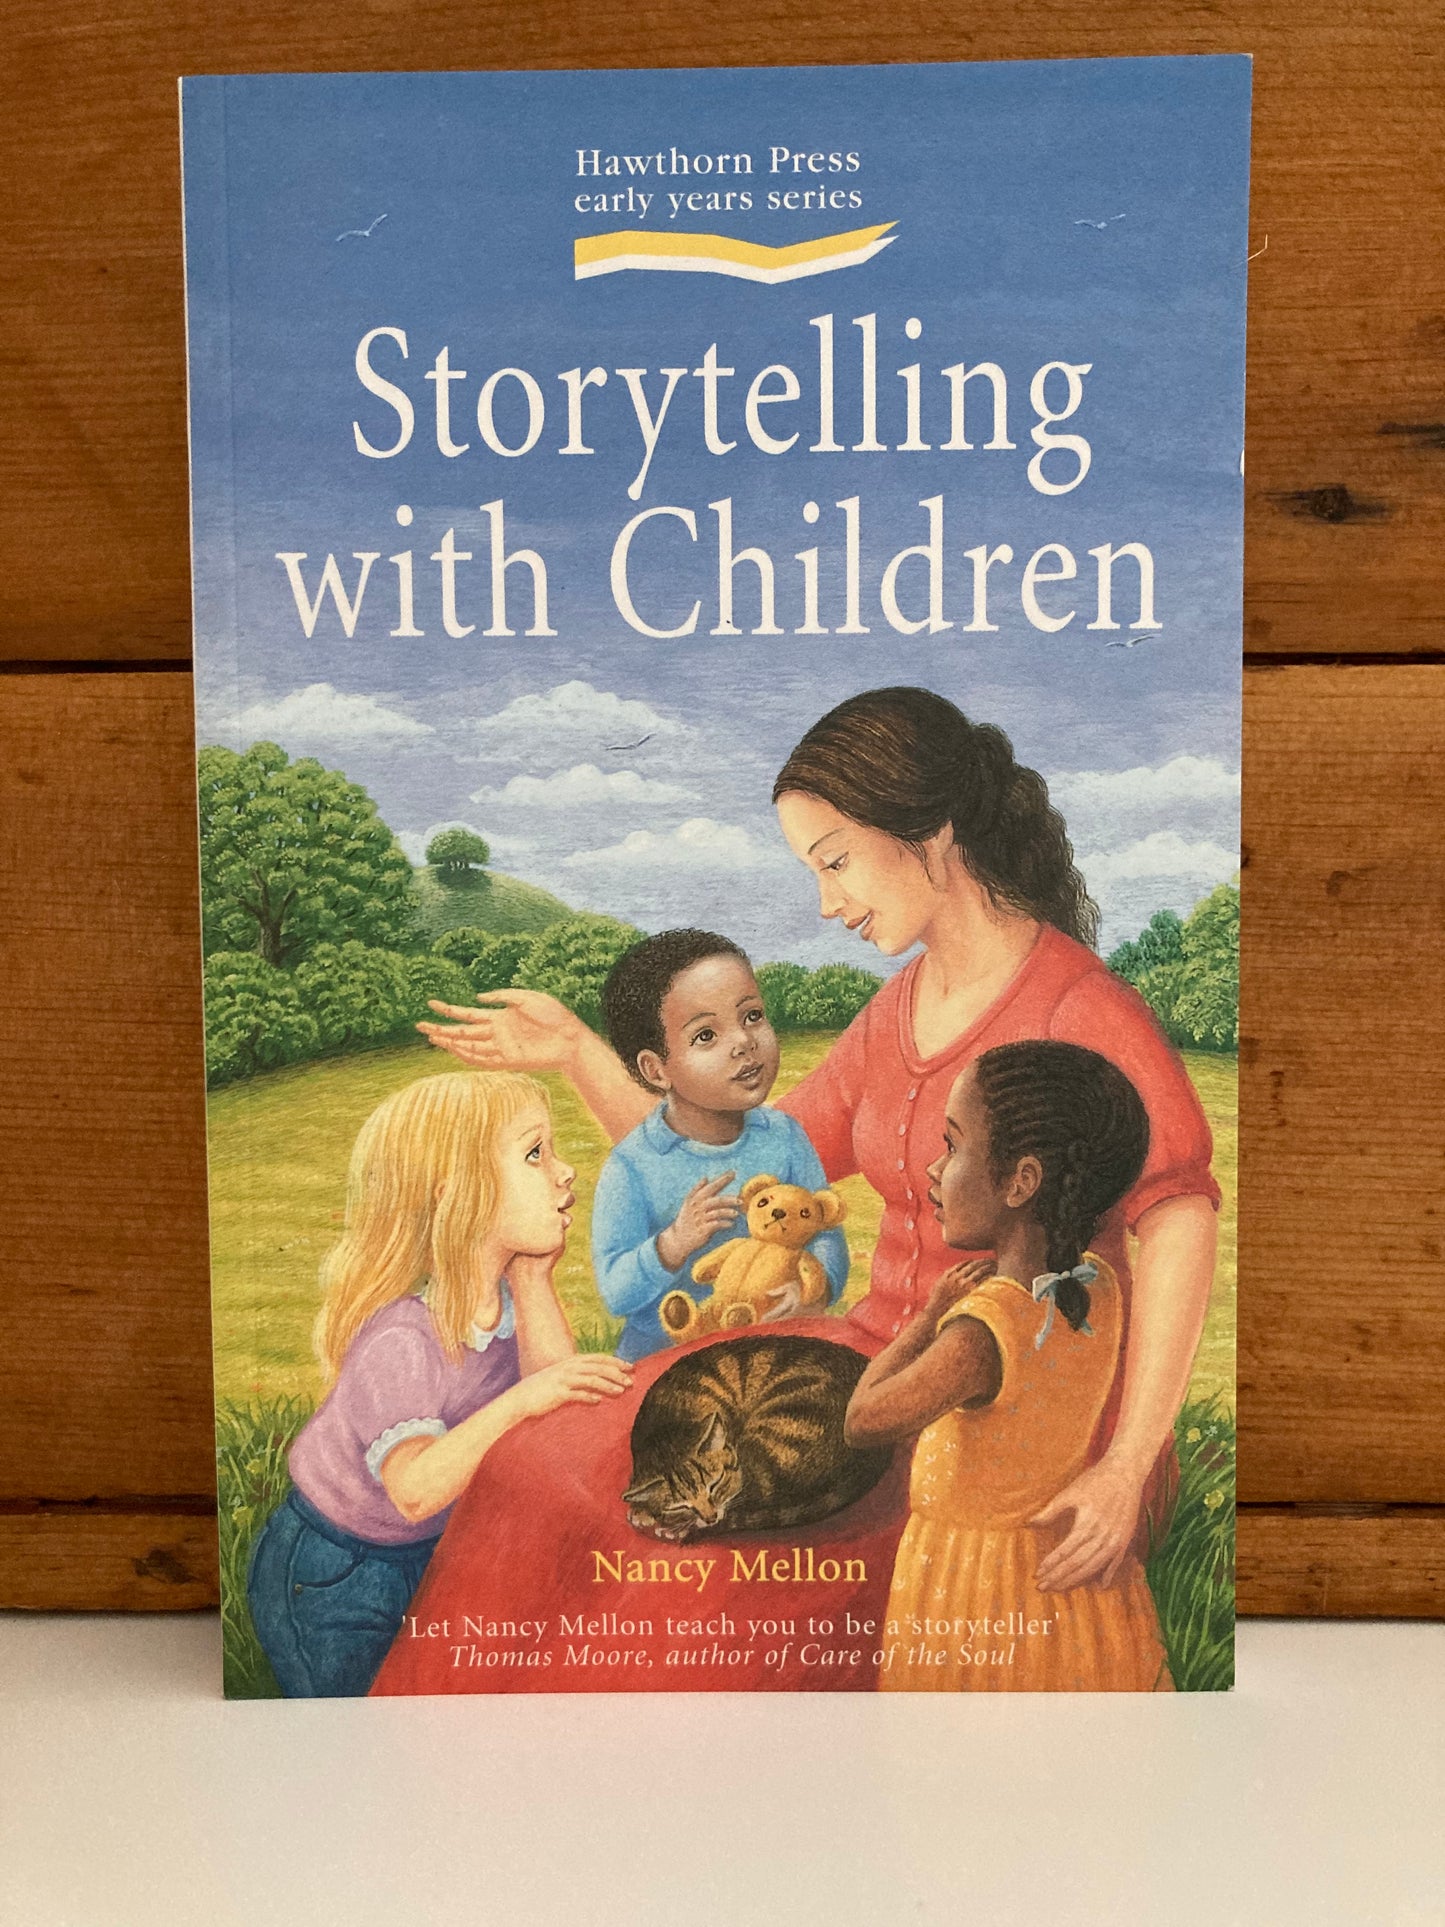 Parenting Resource Book - STORYTELLING WITH CHILDREN